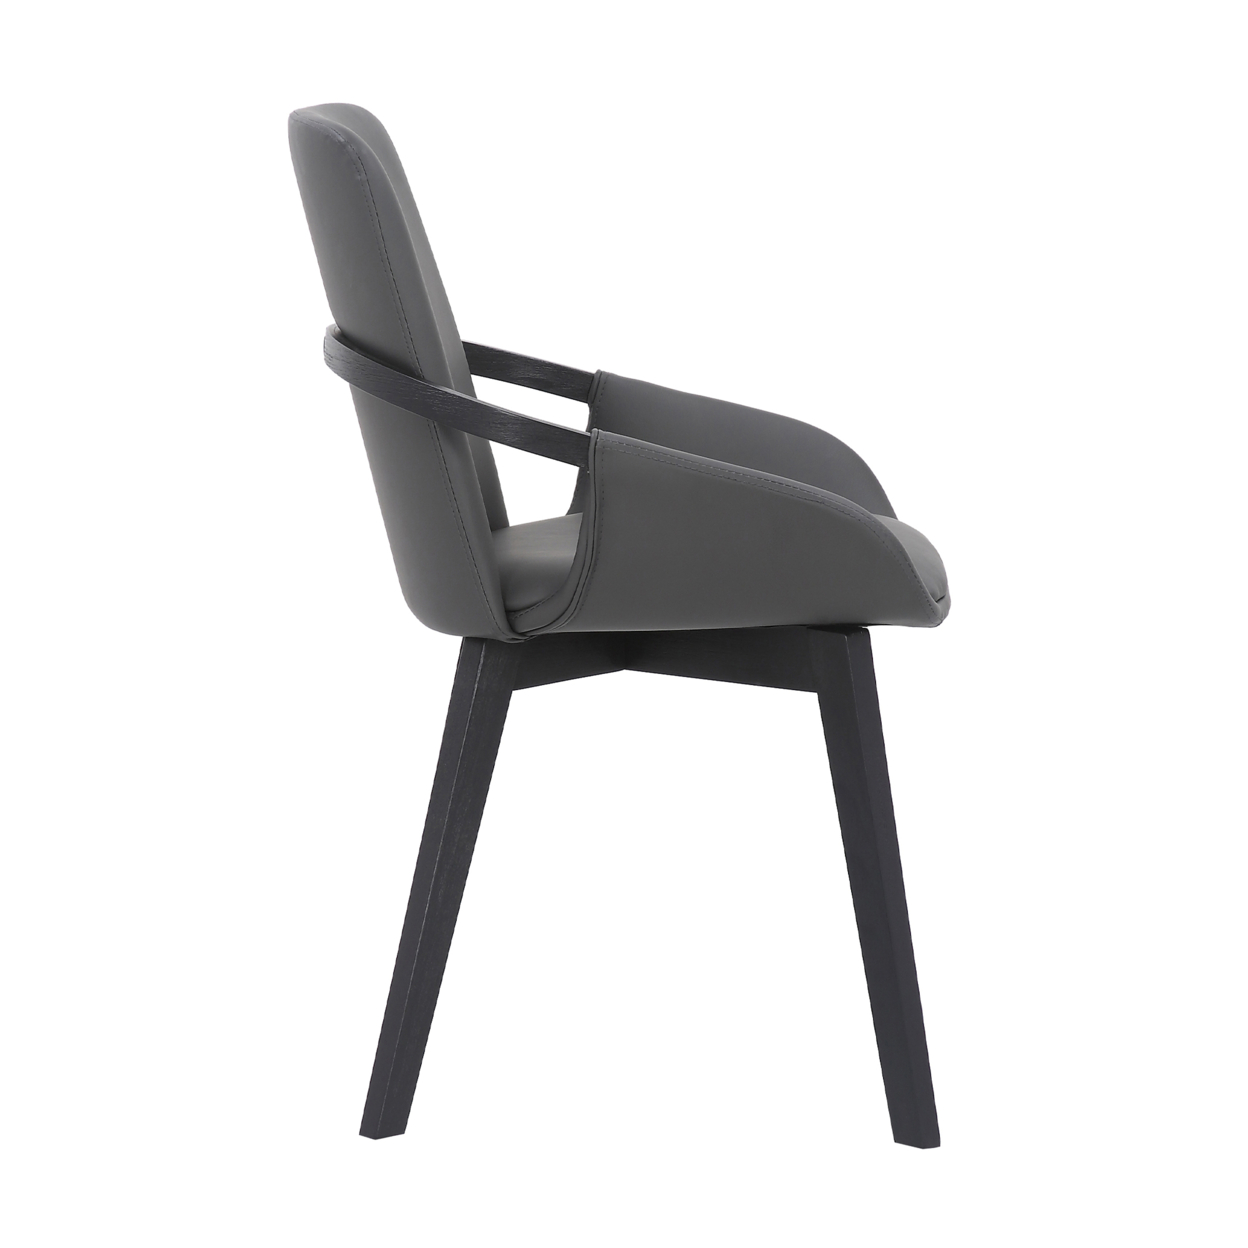 19 Inches Leatherette Dining Chair With Bucket Seat, Black- Saltoro Sherpi